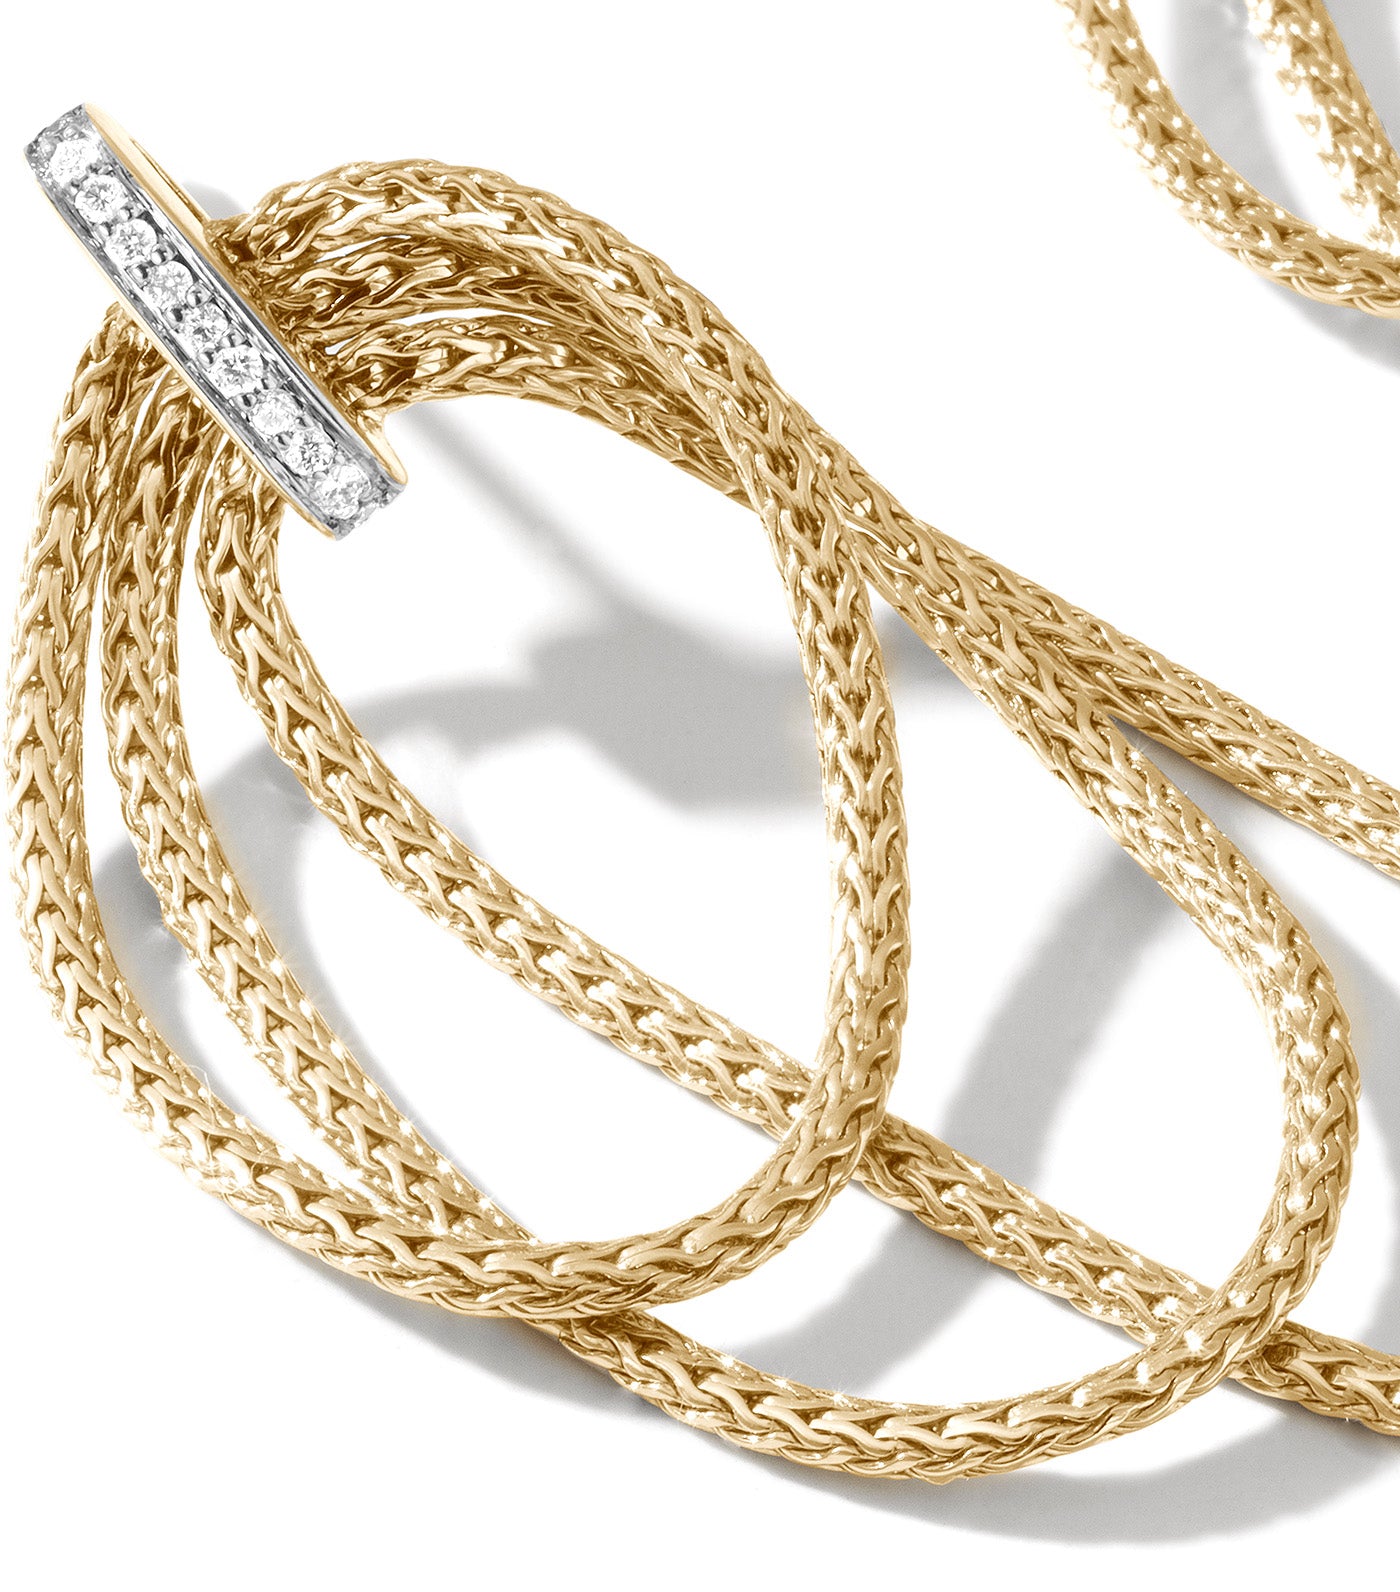 Classic Chain Link Drop Earring 18k Yellow Gold with 0.11ct Diamonds